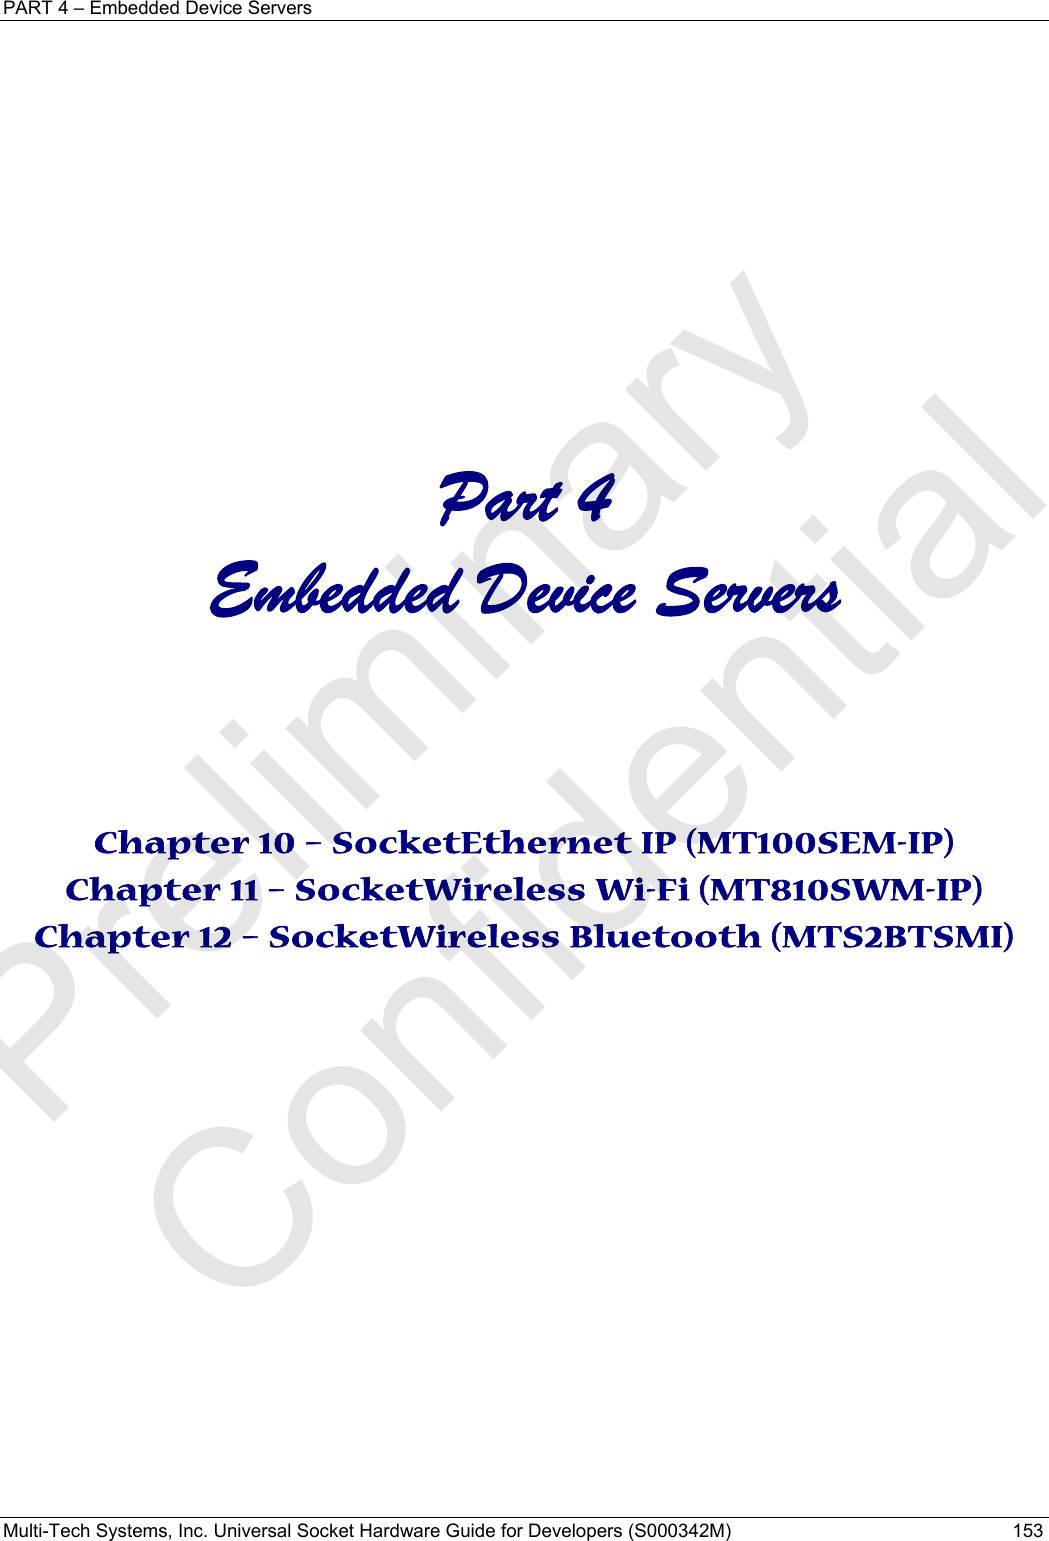 PART 4 – Embedded Device Servers Multi-Tech Systems, Inc. Universal Socket Hardware Guide for Developers (S000342M)  153               Part 4 Embedded Device Servers    Chapter 10 – SocketEthernet IP (MT100SEM-IP) Chapter 11 – SocketWireless Wi-Fi (MT810SWM-IP) Chapter 12 – SocketWireless Bluetooth (MTS2BTSMI)    Preliminary  Confidential